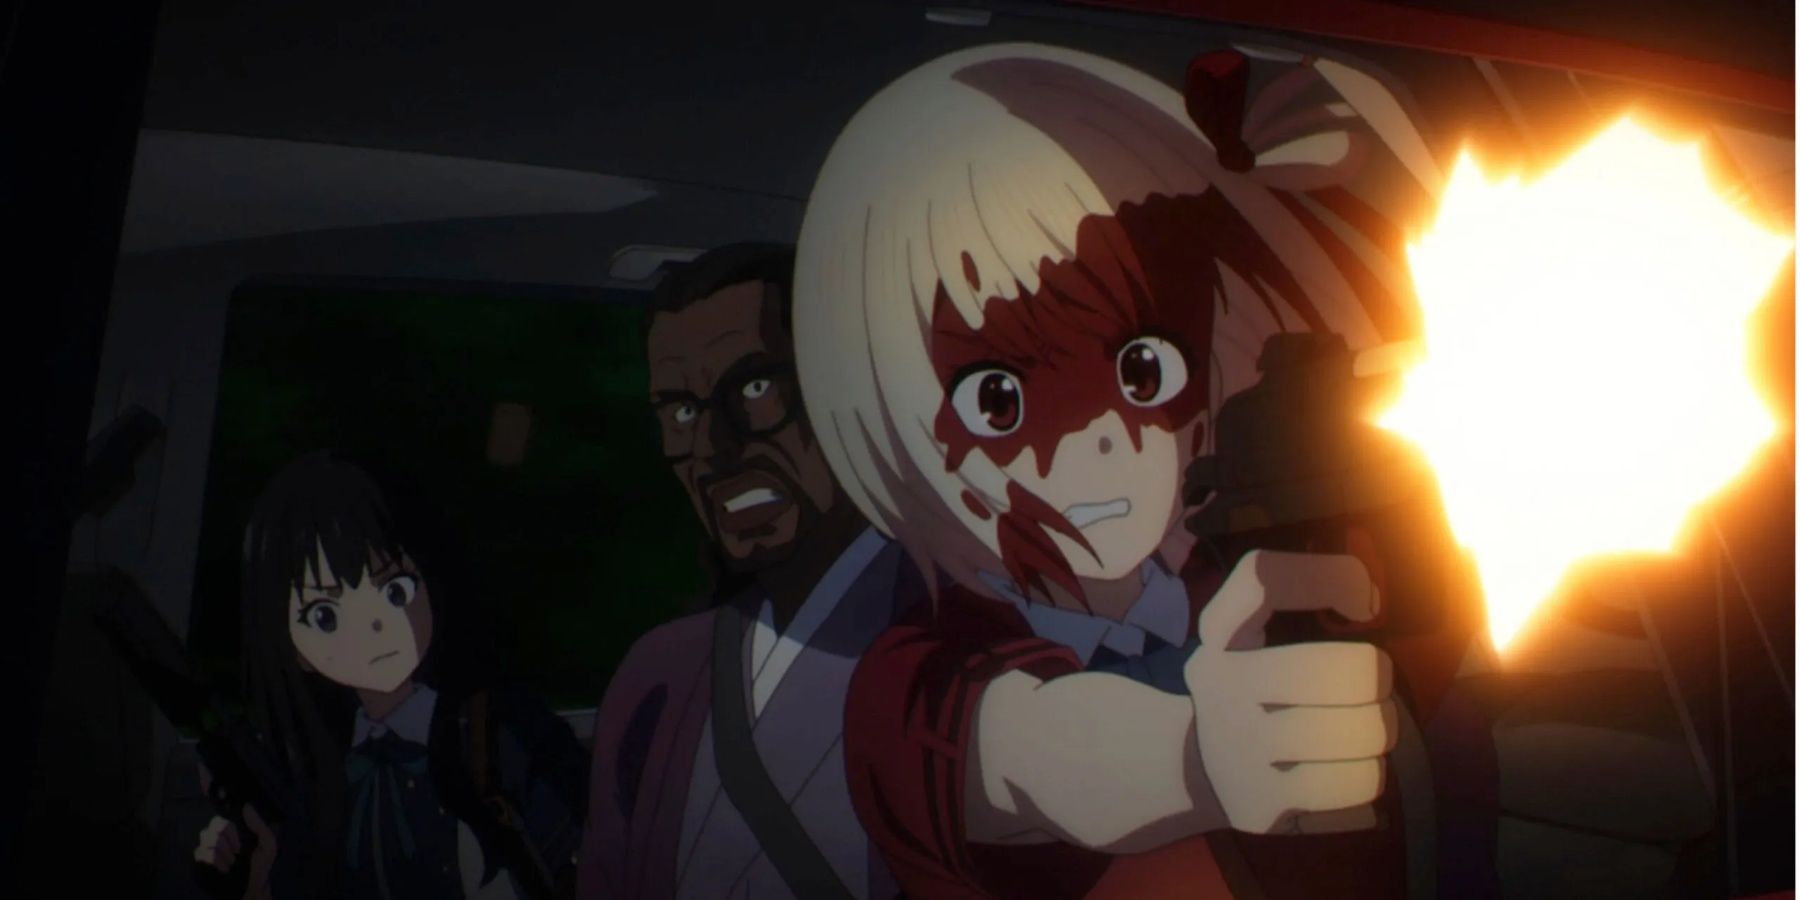 chisato bloodied in combat in lycoris recoil